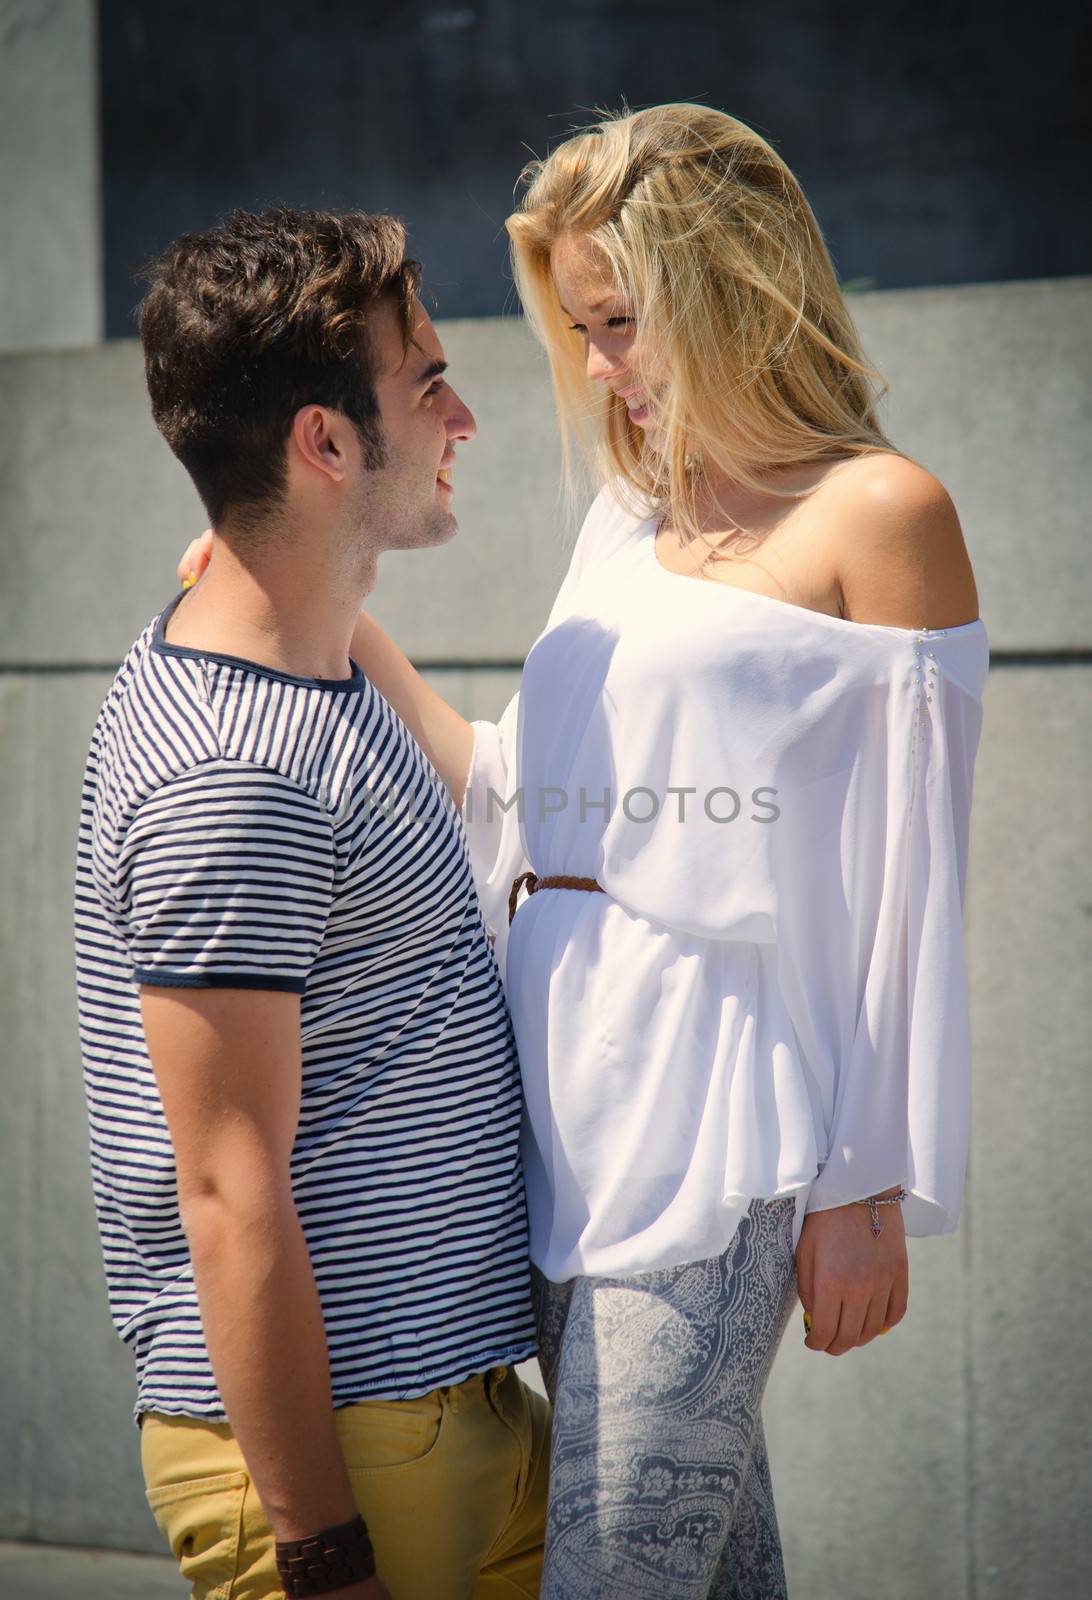 Romantic couple looking in each other's eyes smiling by artofphoto